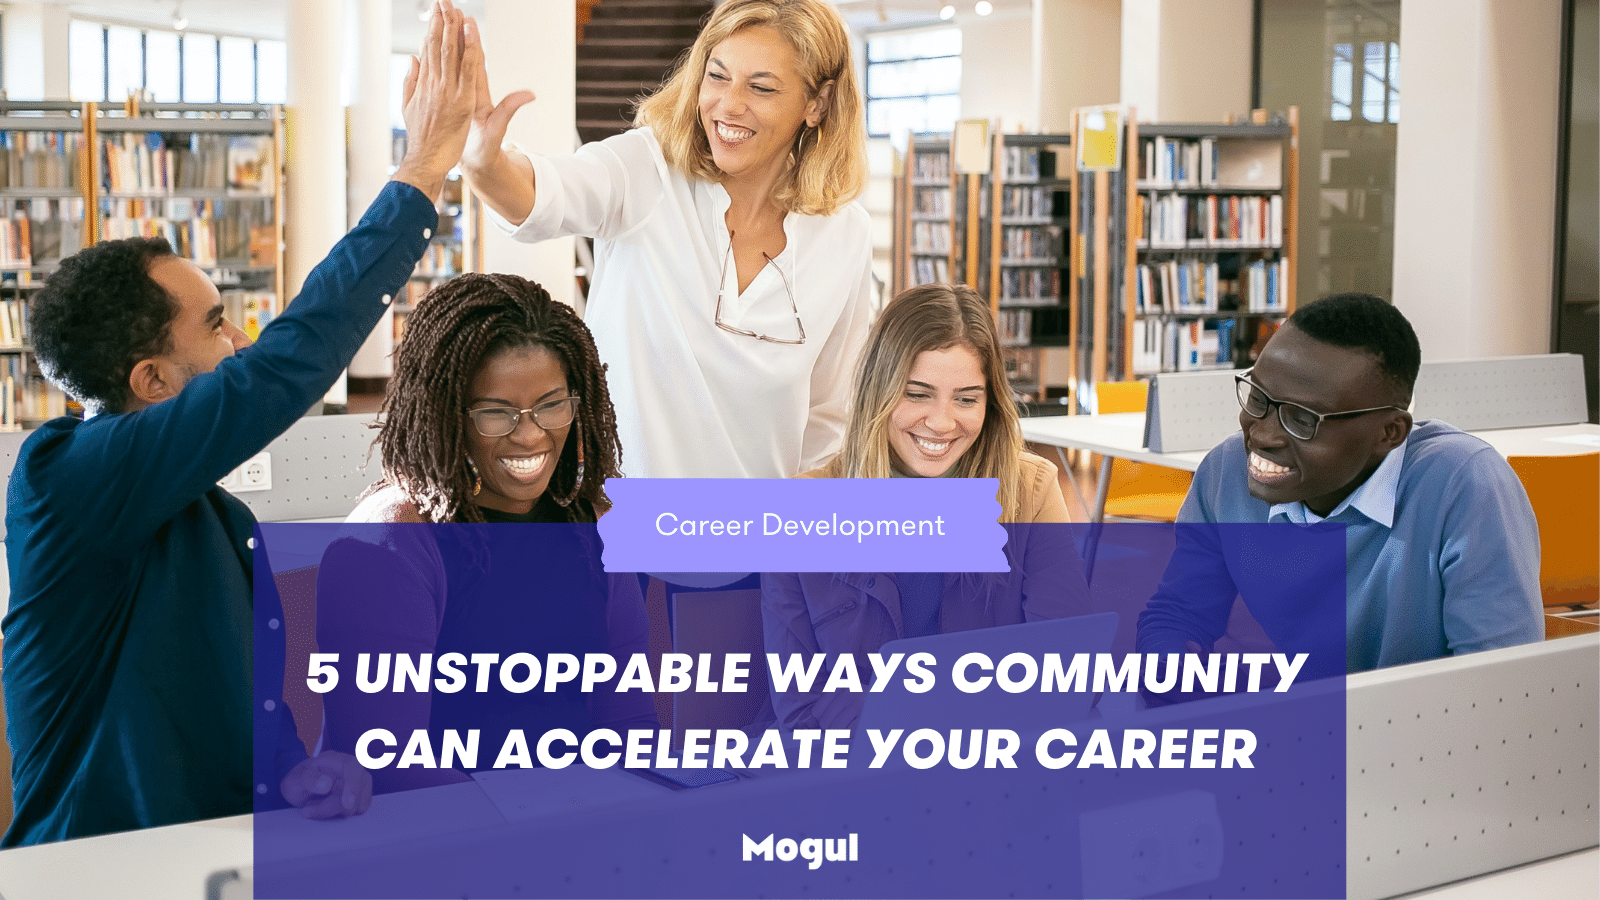 5 Unstoppable Ways Community Can Accelerate Your Career